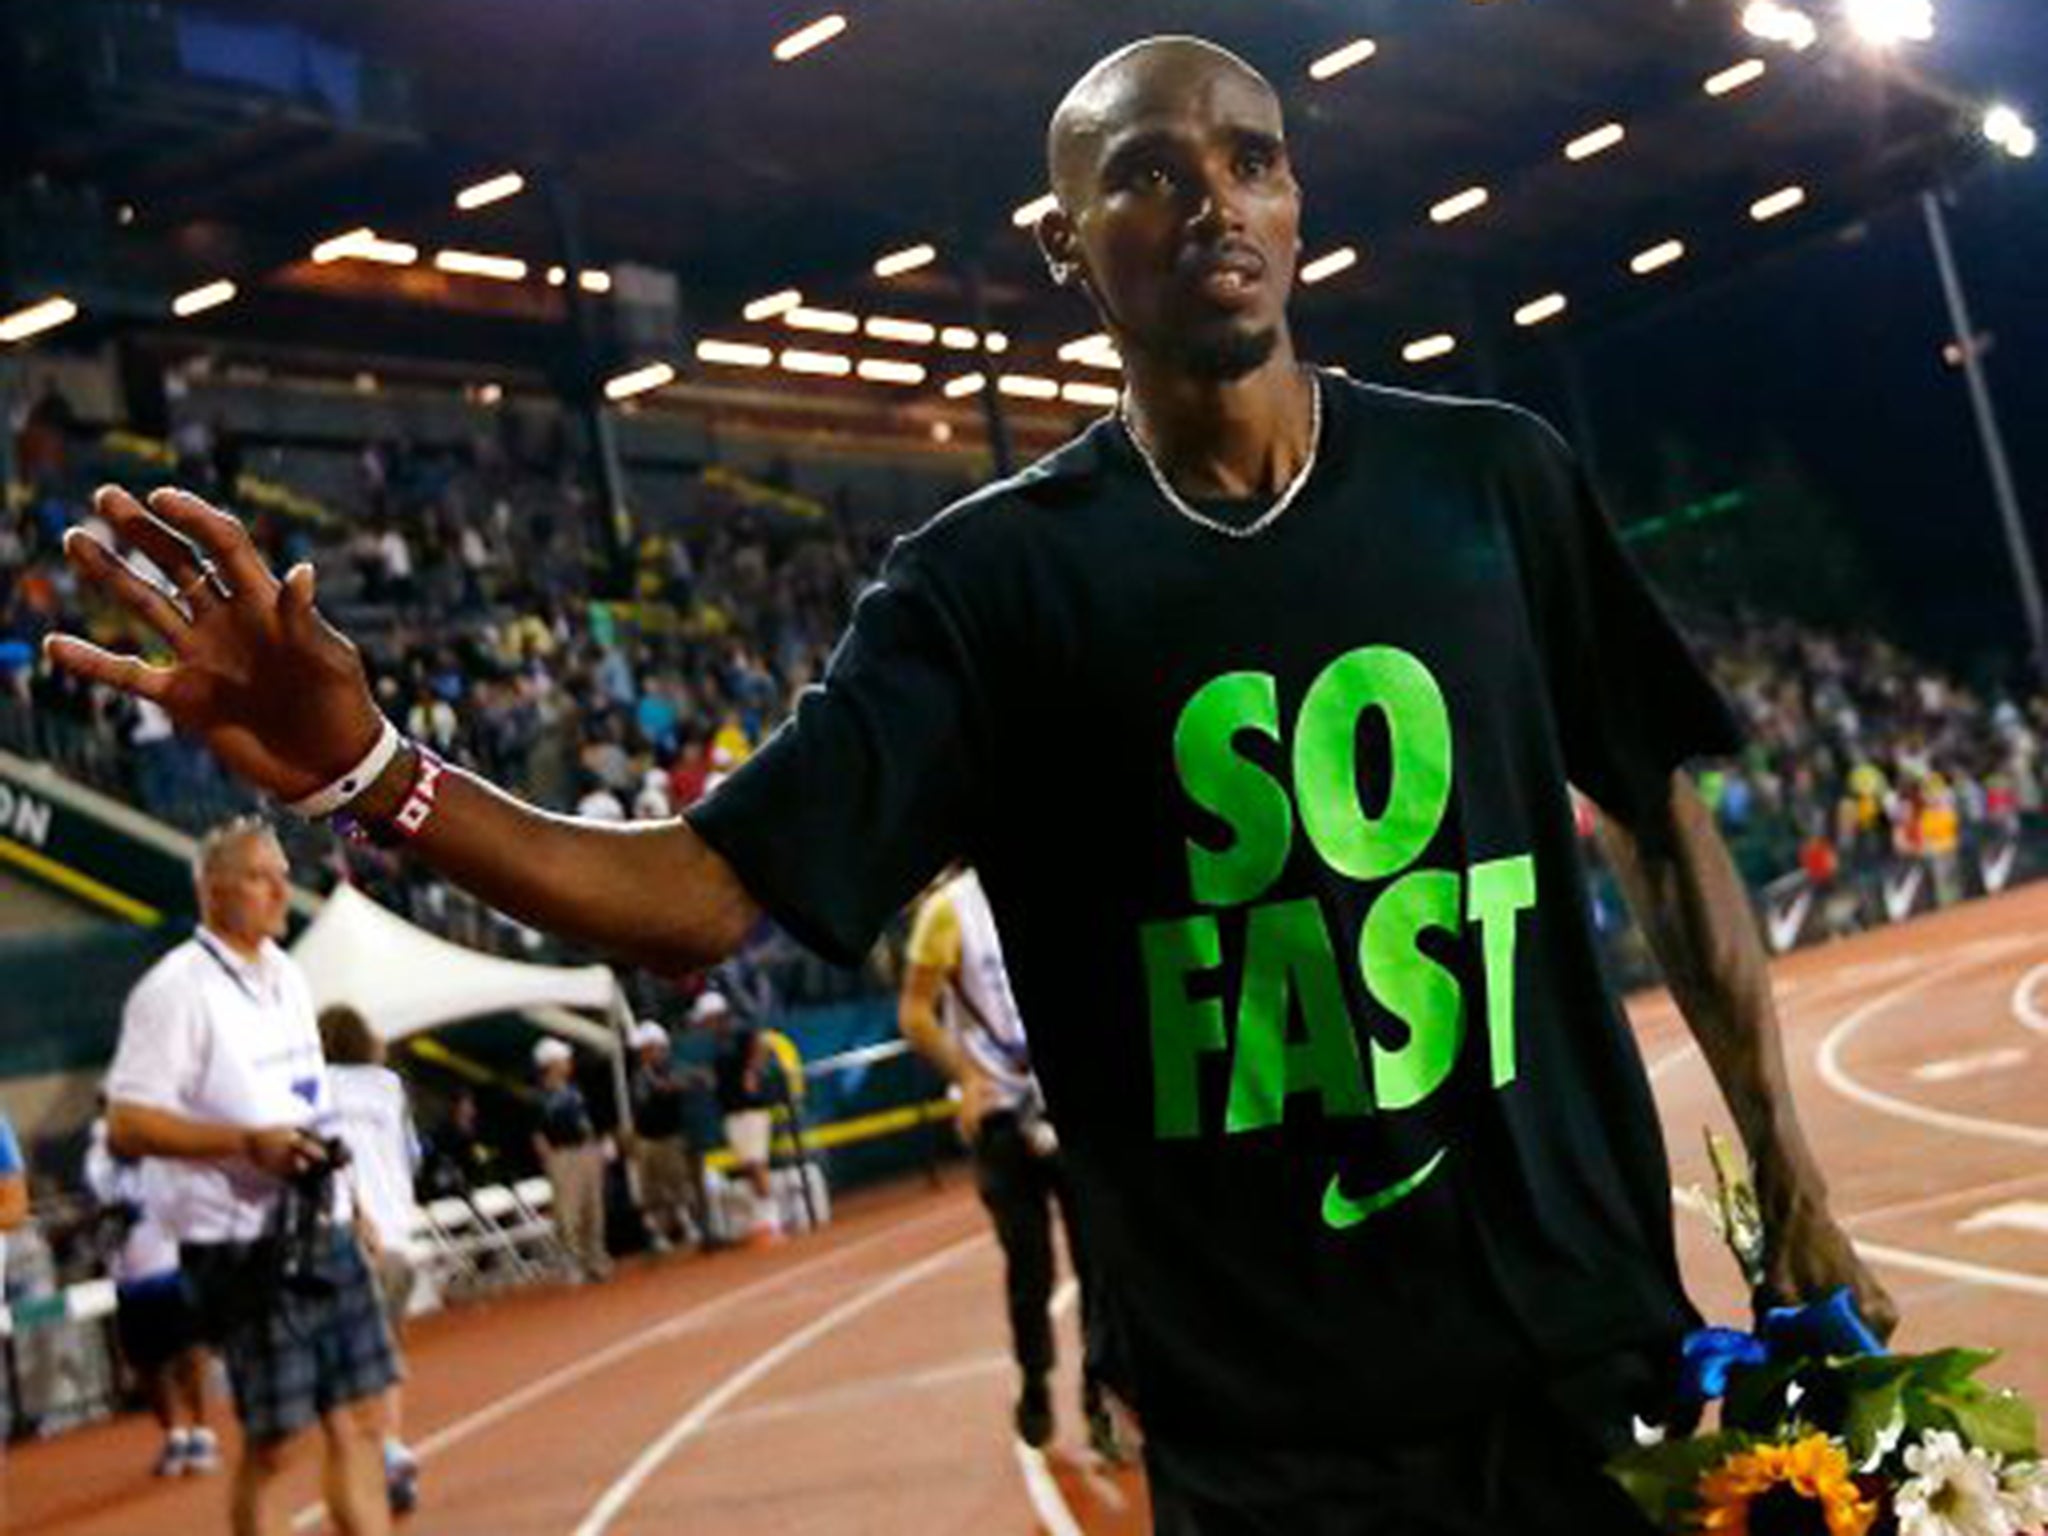 Mo Farah after winning the 10,000m at last month’s Diamond League meeting in Oregon